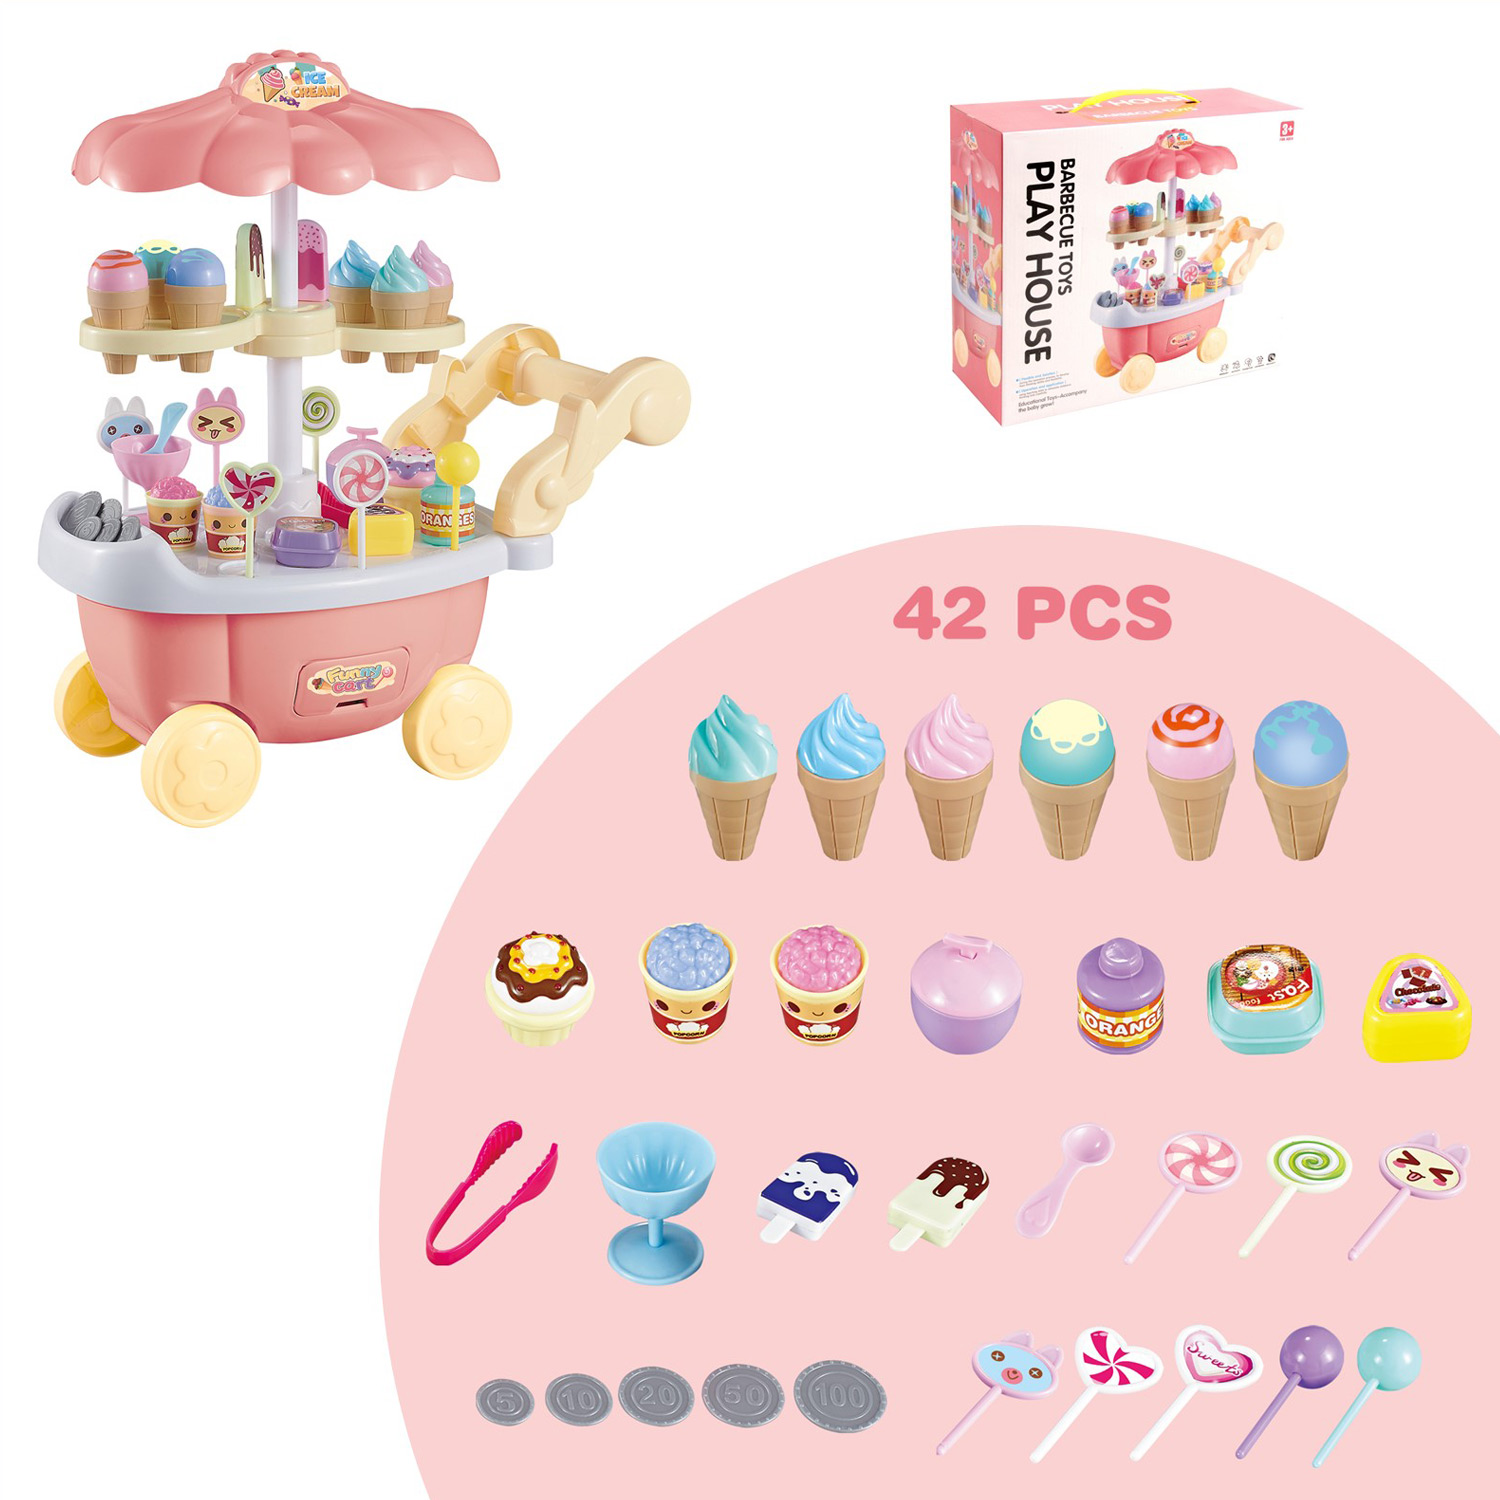 Ice Cream Cart 39 Pieces Dessert Candy Trolley Kitchen Toy Set With Lights Music Includes Umbrella Food Accessories 3 feet tall Children's Pretend Play Truck Playset Appliance Set Pieces Perfect For Early Learning Educational Girls Cooking